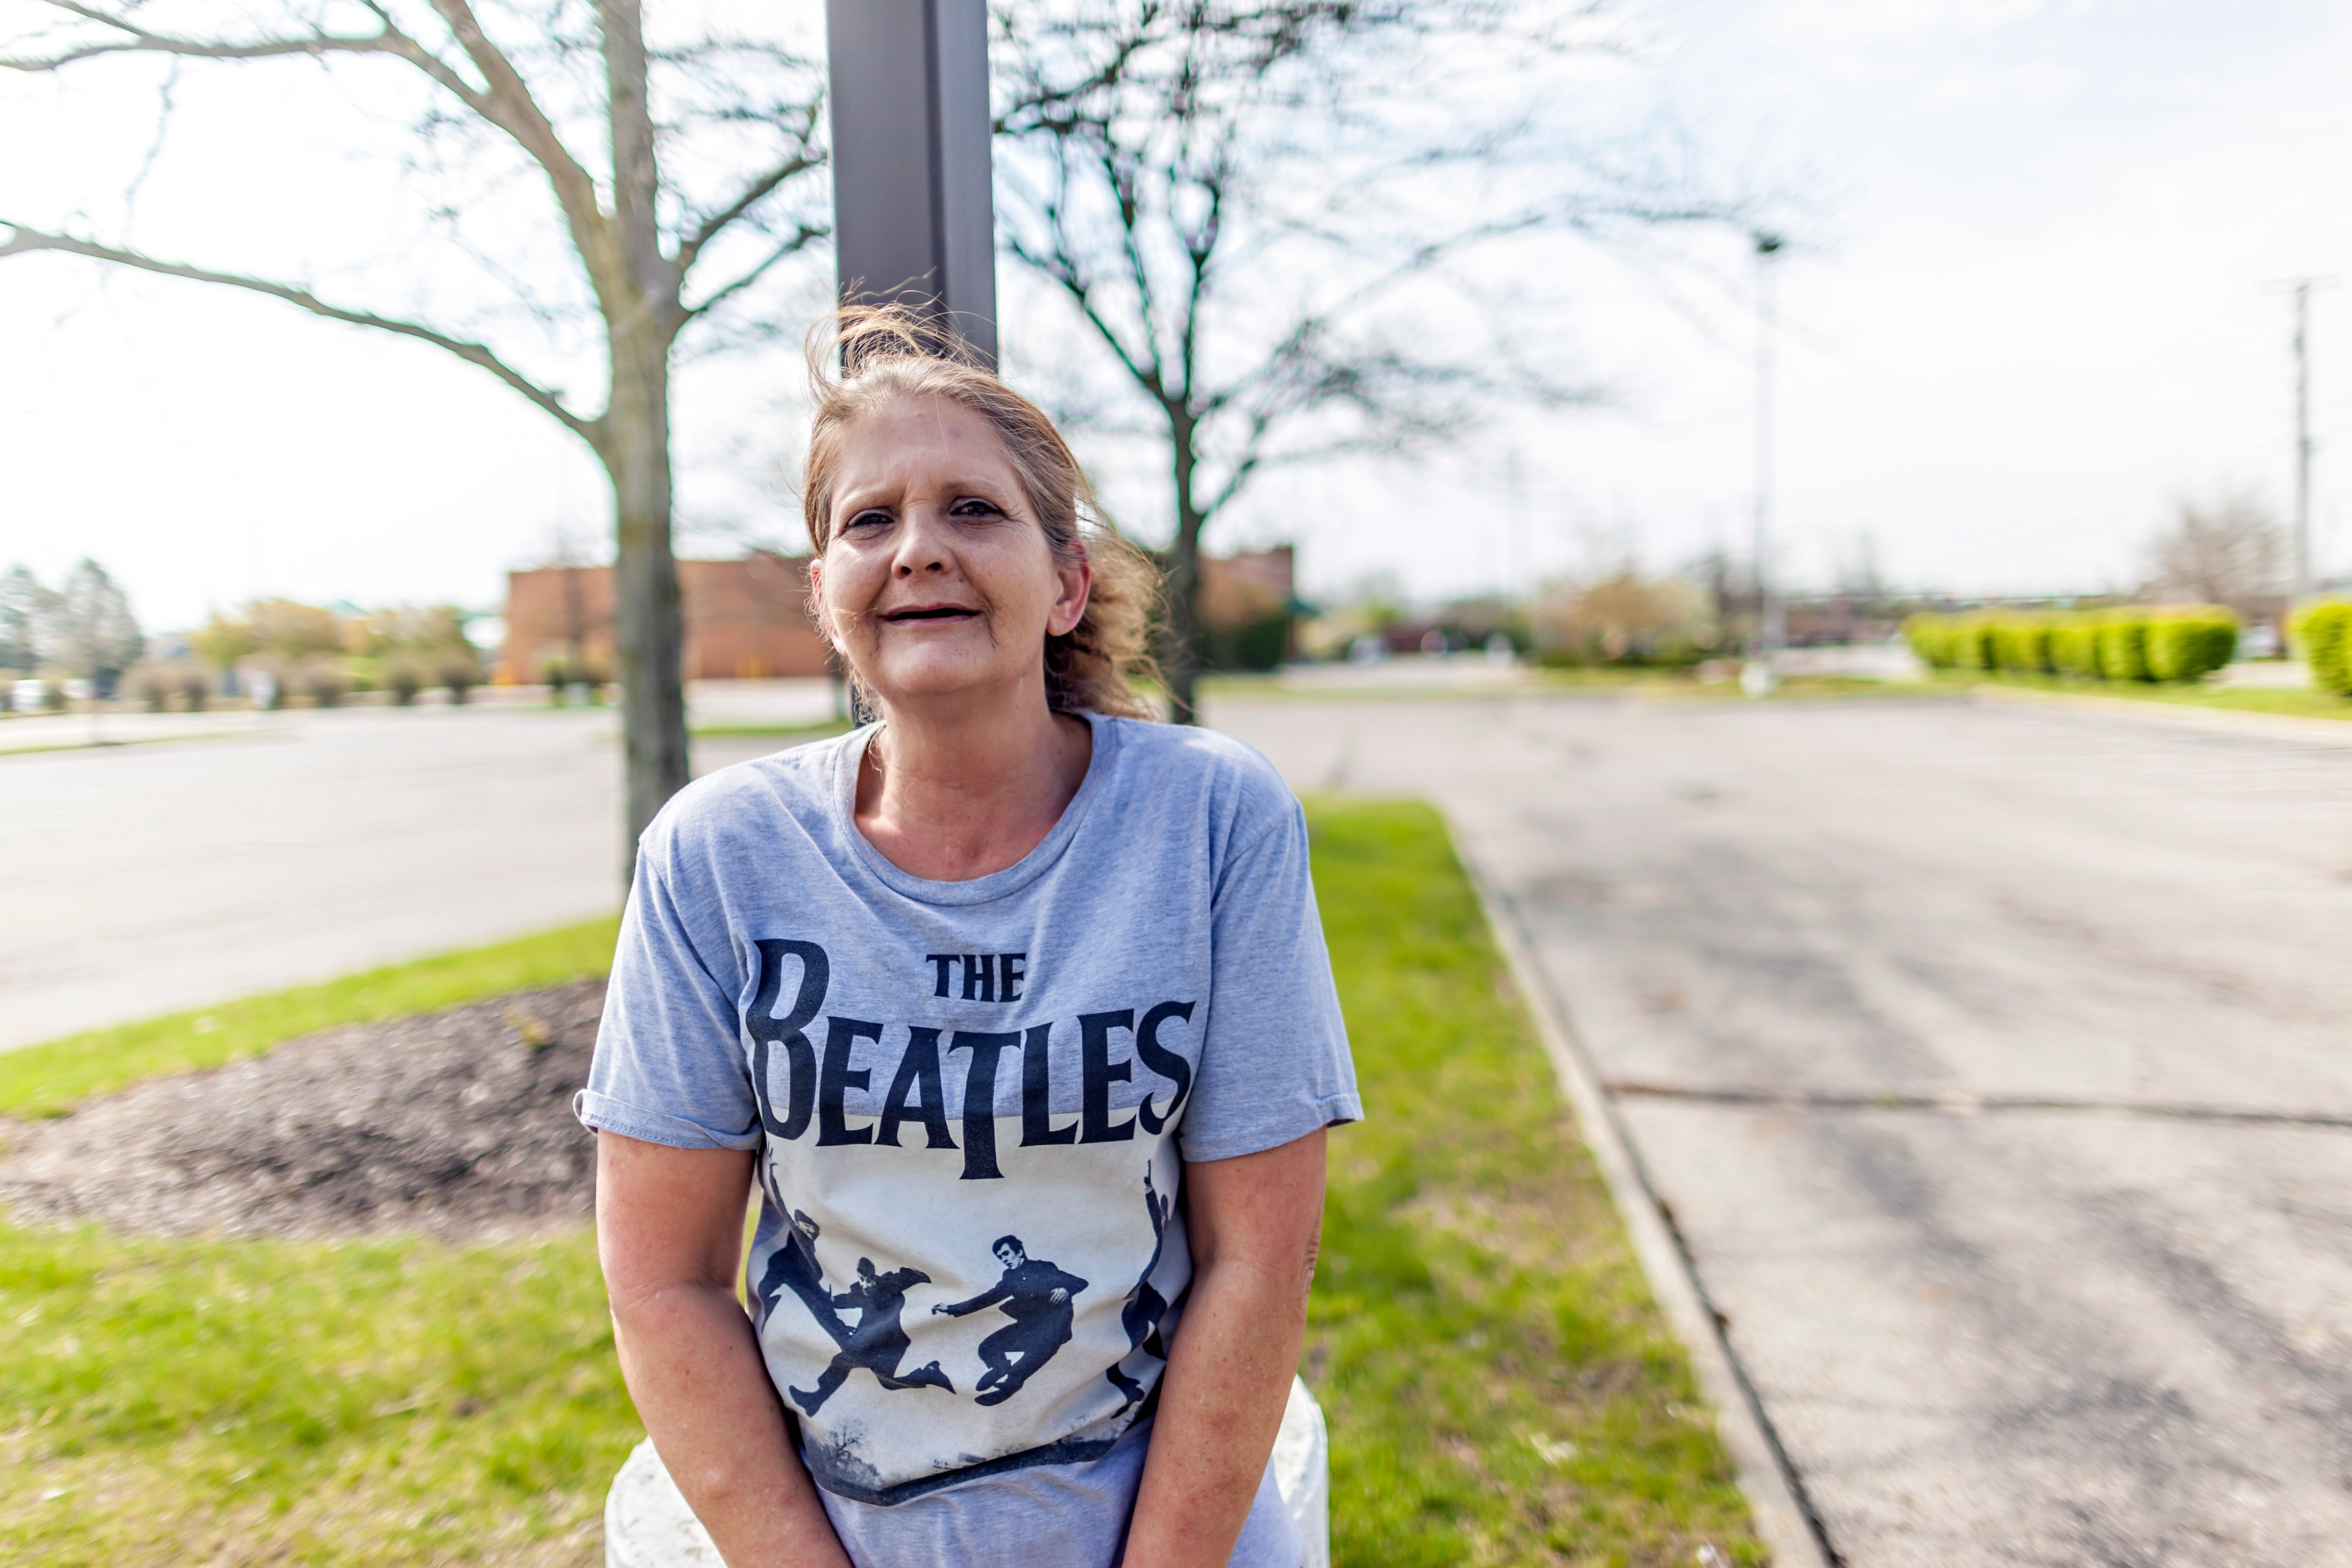 Cindy Kimbler outside her place of work, the Volunteers of America store, in Grove City, Ohio on April 25, 2020. Kimbler received help from the Legal Aid Society of Ohio after debt-collectors started garnishing her wages in March. (James D. DeCamp—JamesDeCamp.com)